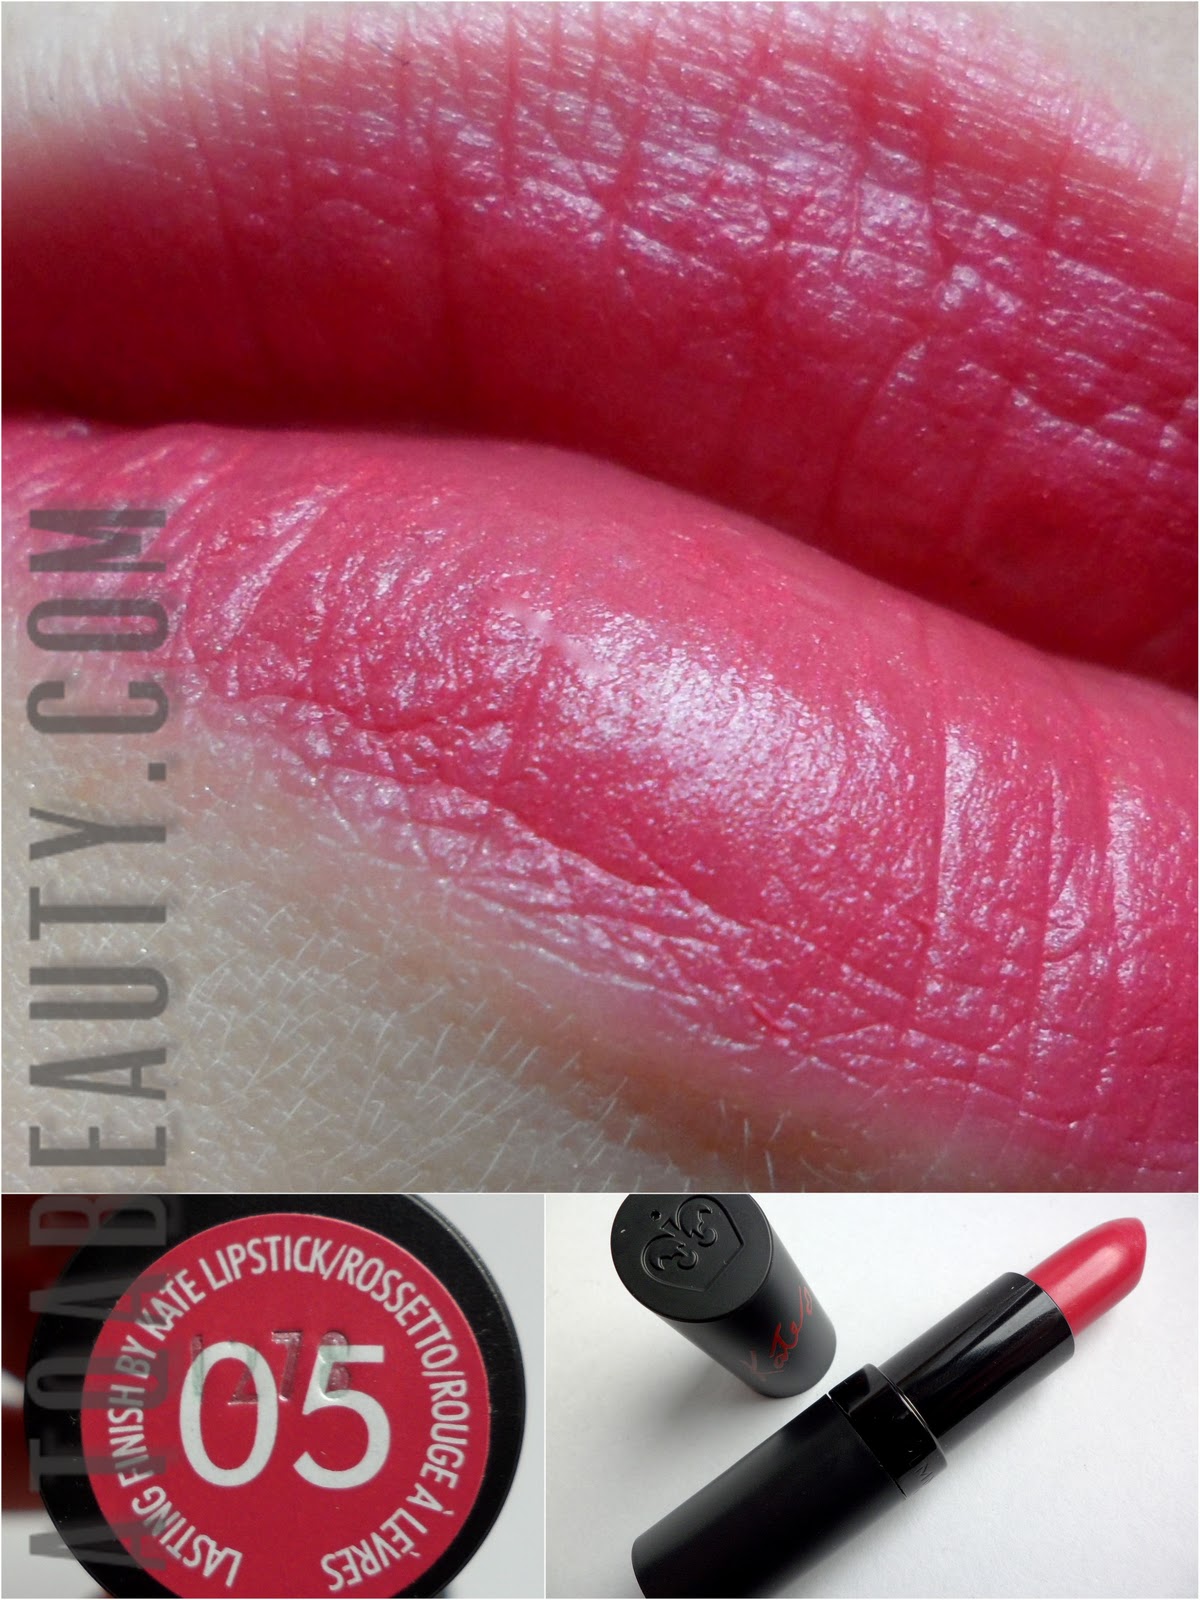 Rimmel, Lasting Finish by Kate Moss, 05